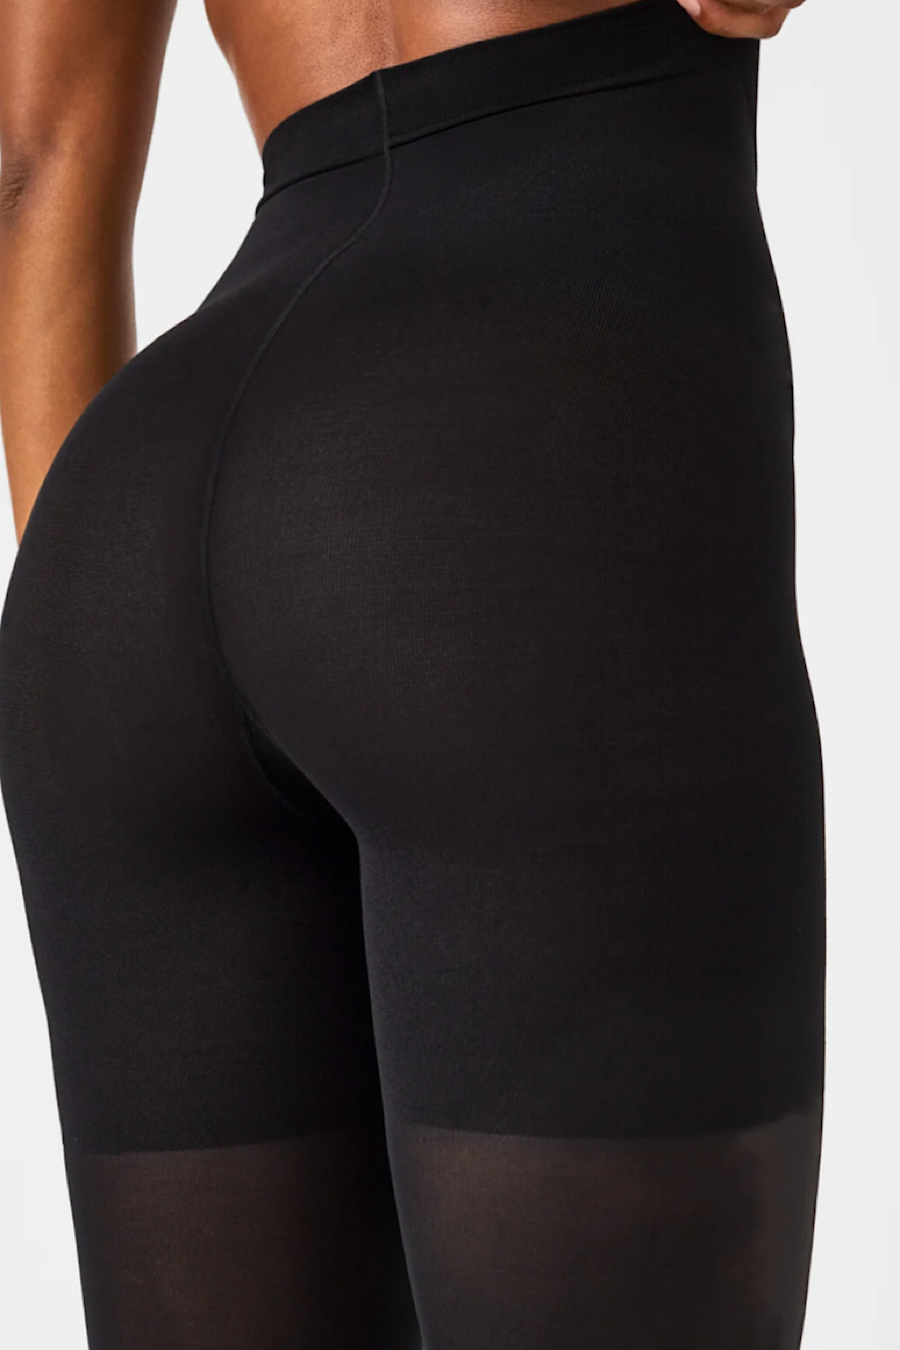 Spanx® Tight-End Tights in Black